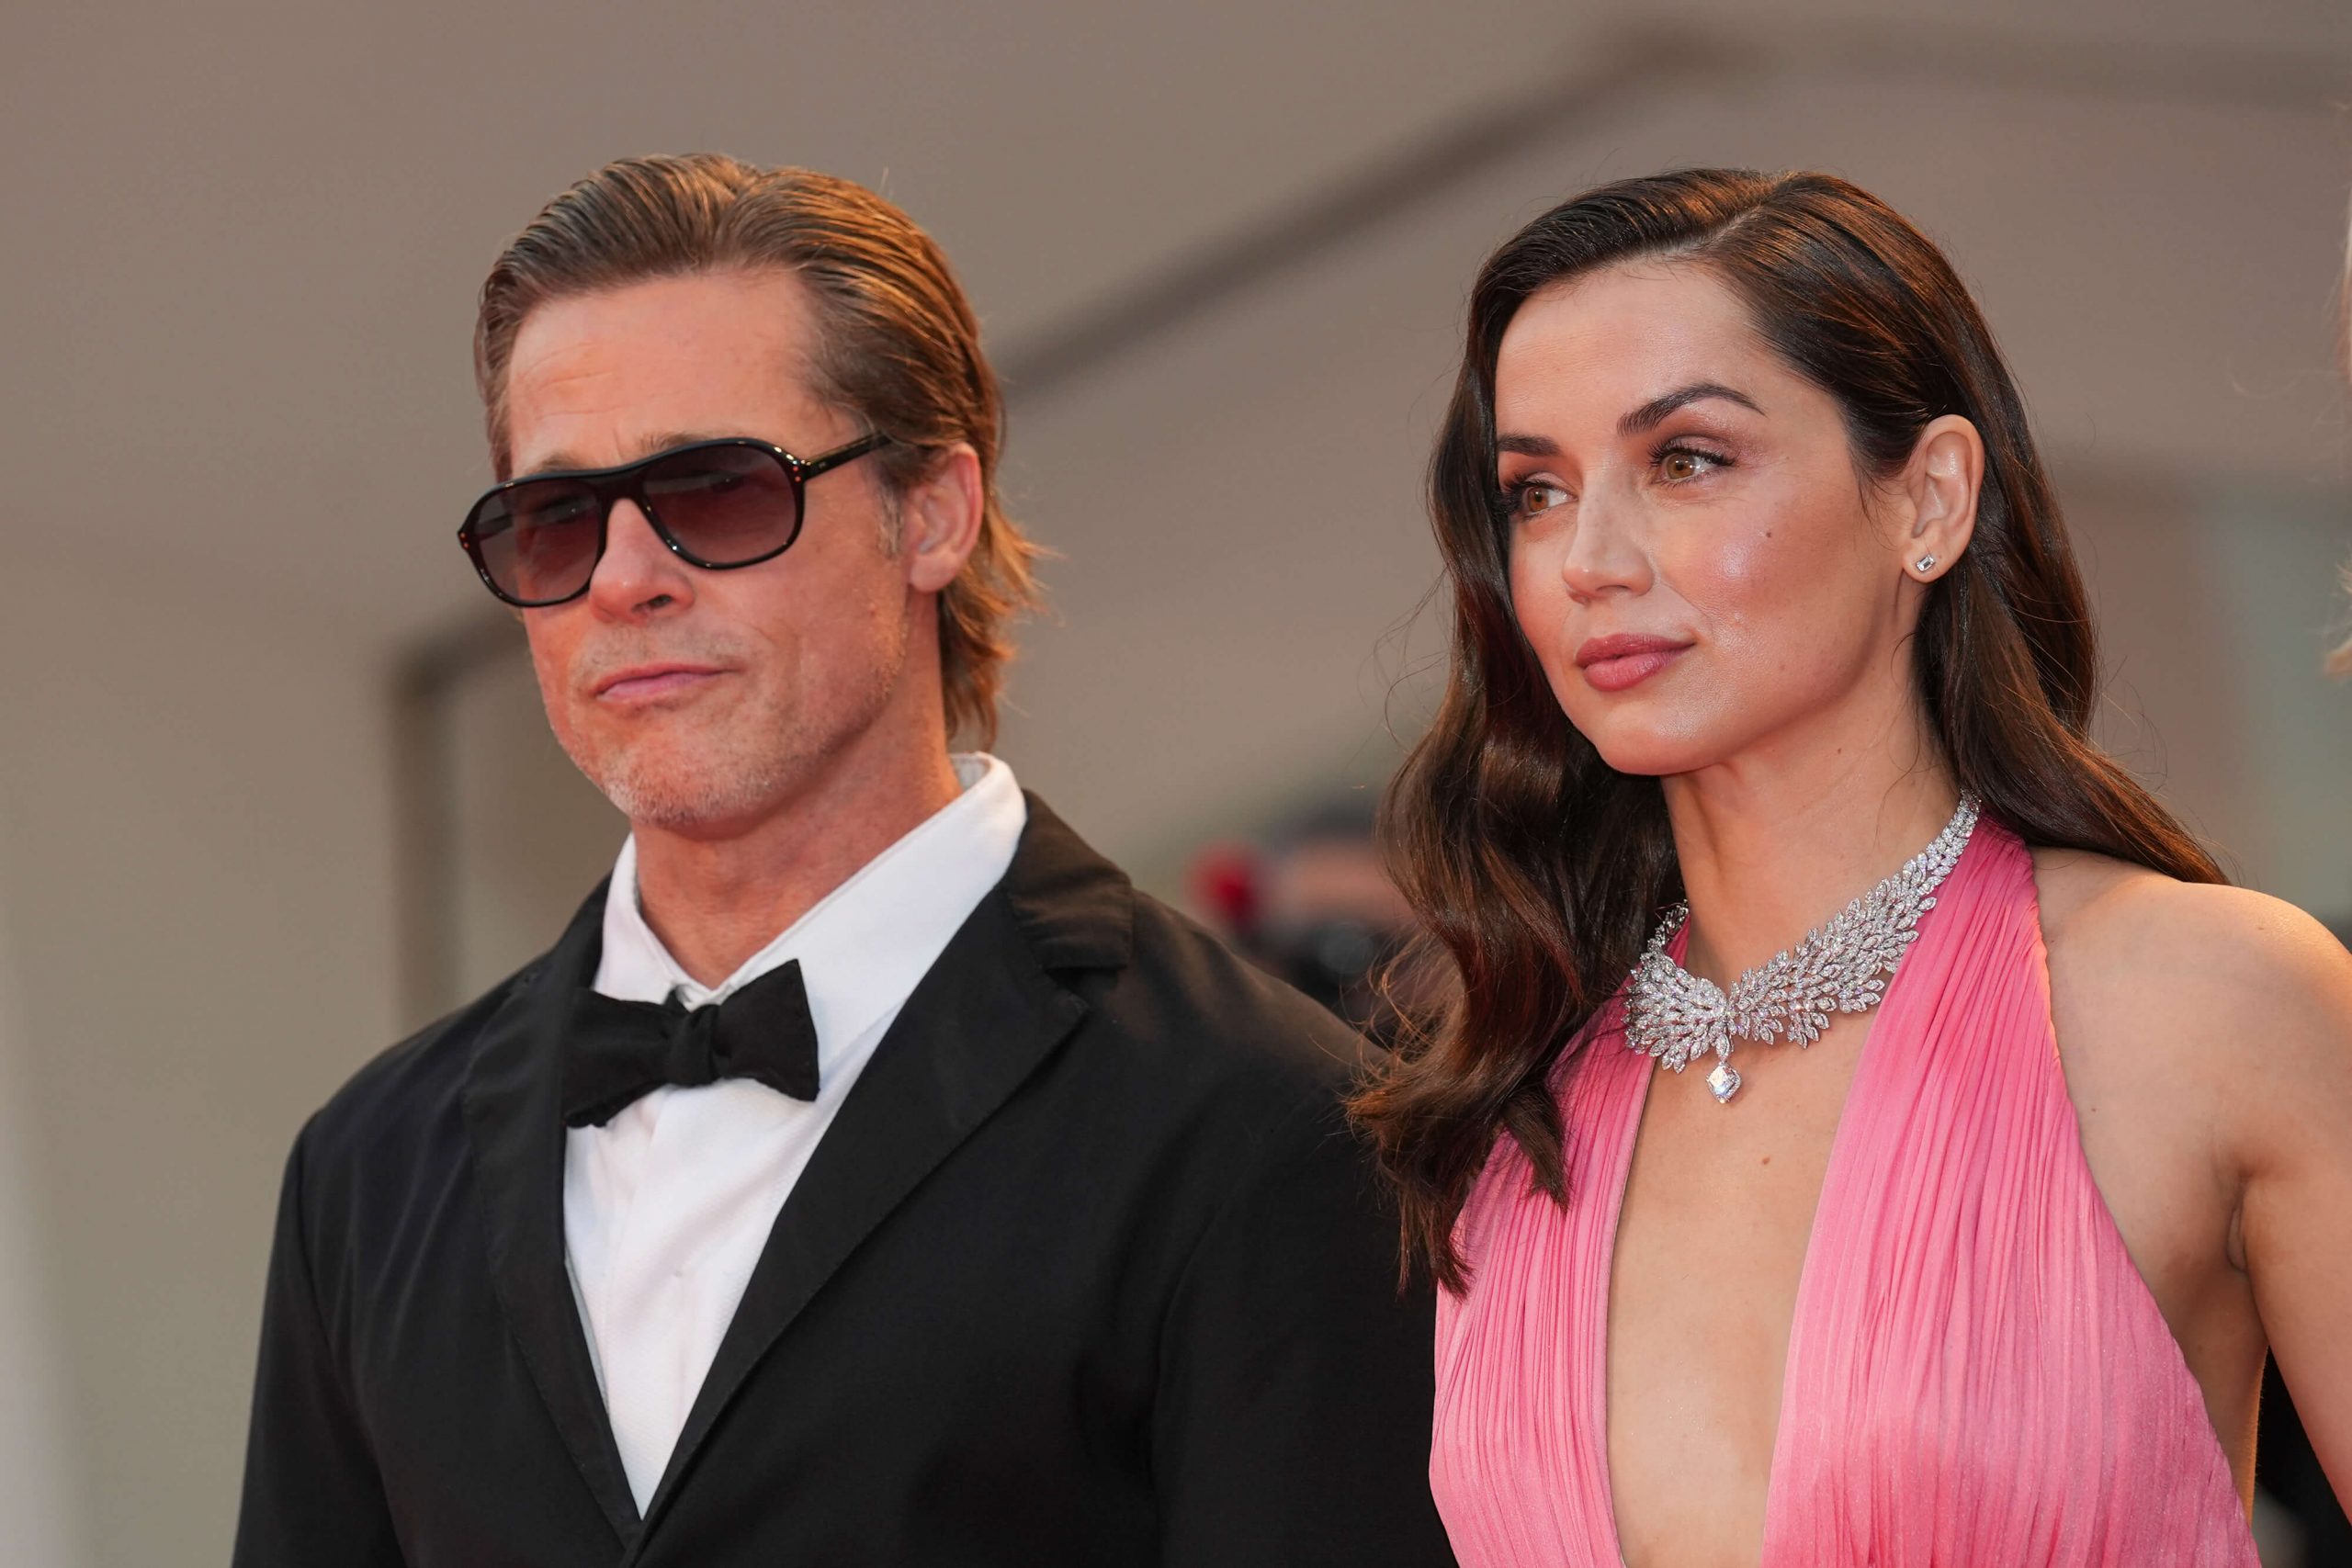 Brad Pitt and Ana de Armas attend the "Blonde" red carpet at the 79th Venice International Film Festival on September 08, 2022 in Venice, Italy.